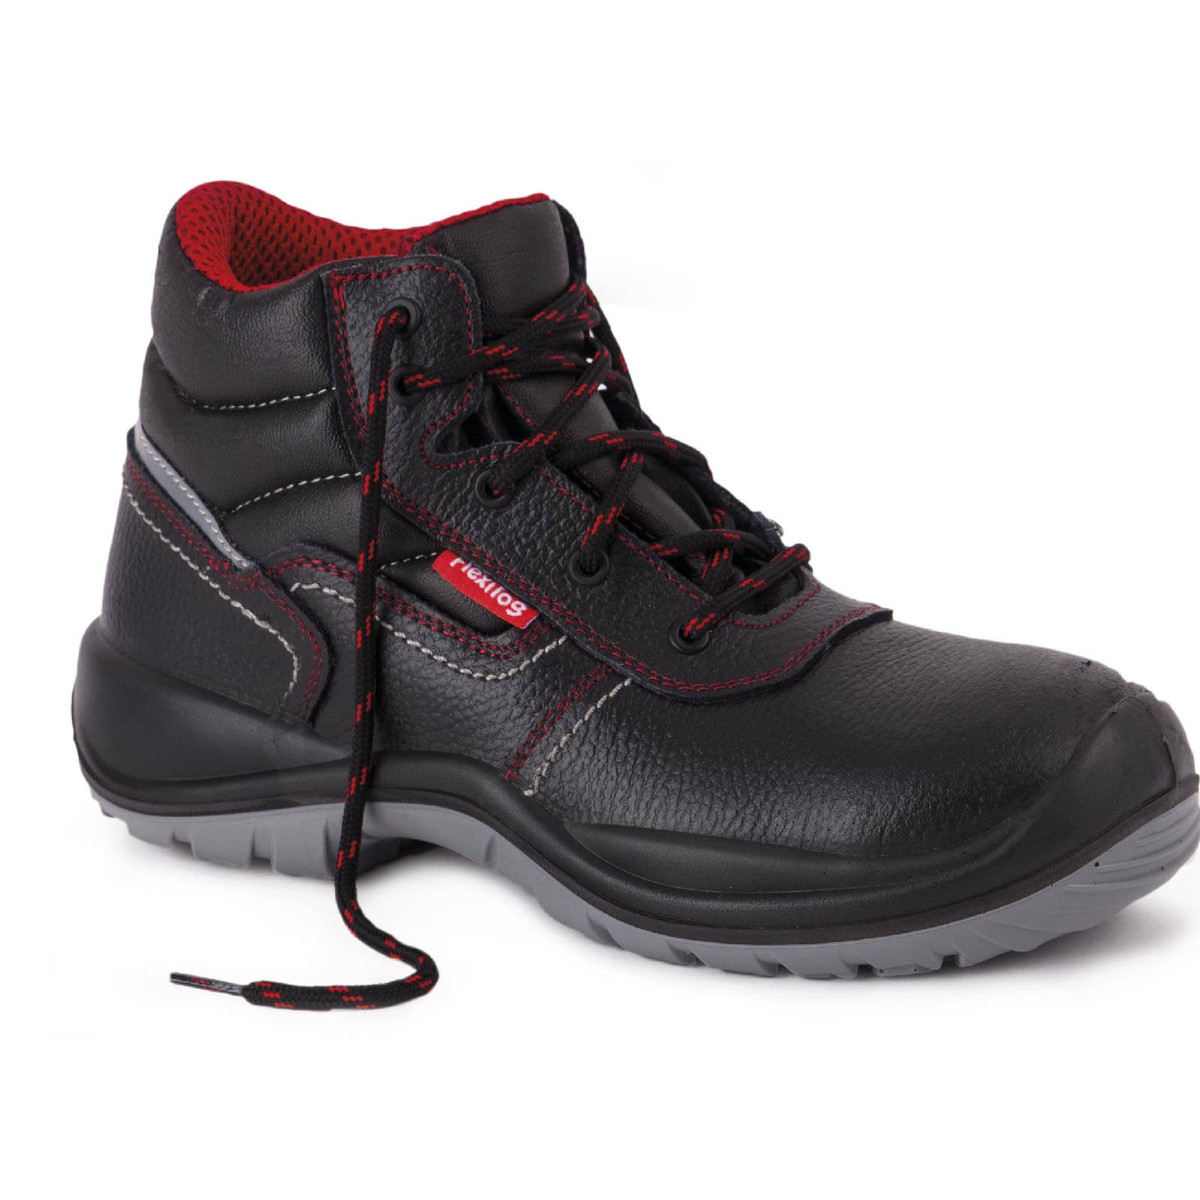 Flexitog 302 leather safety boots